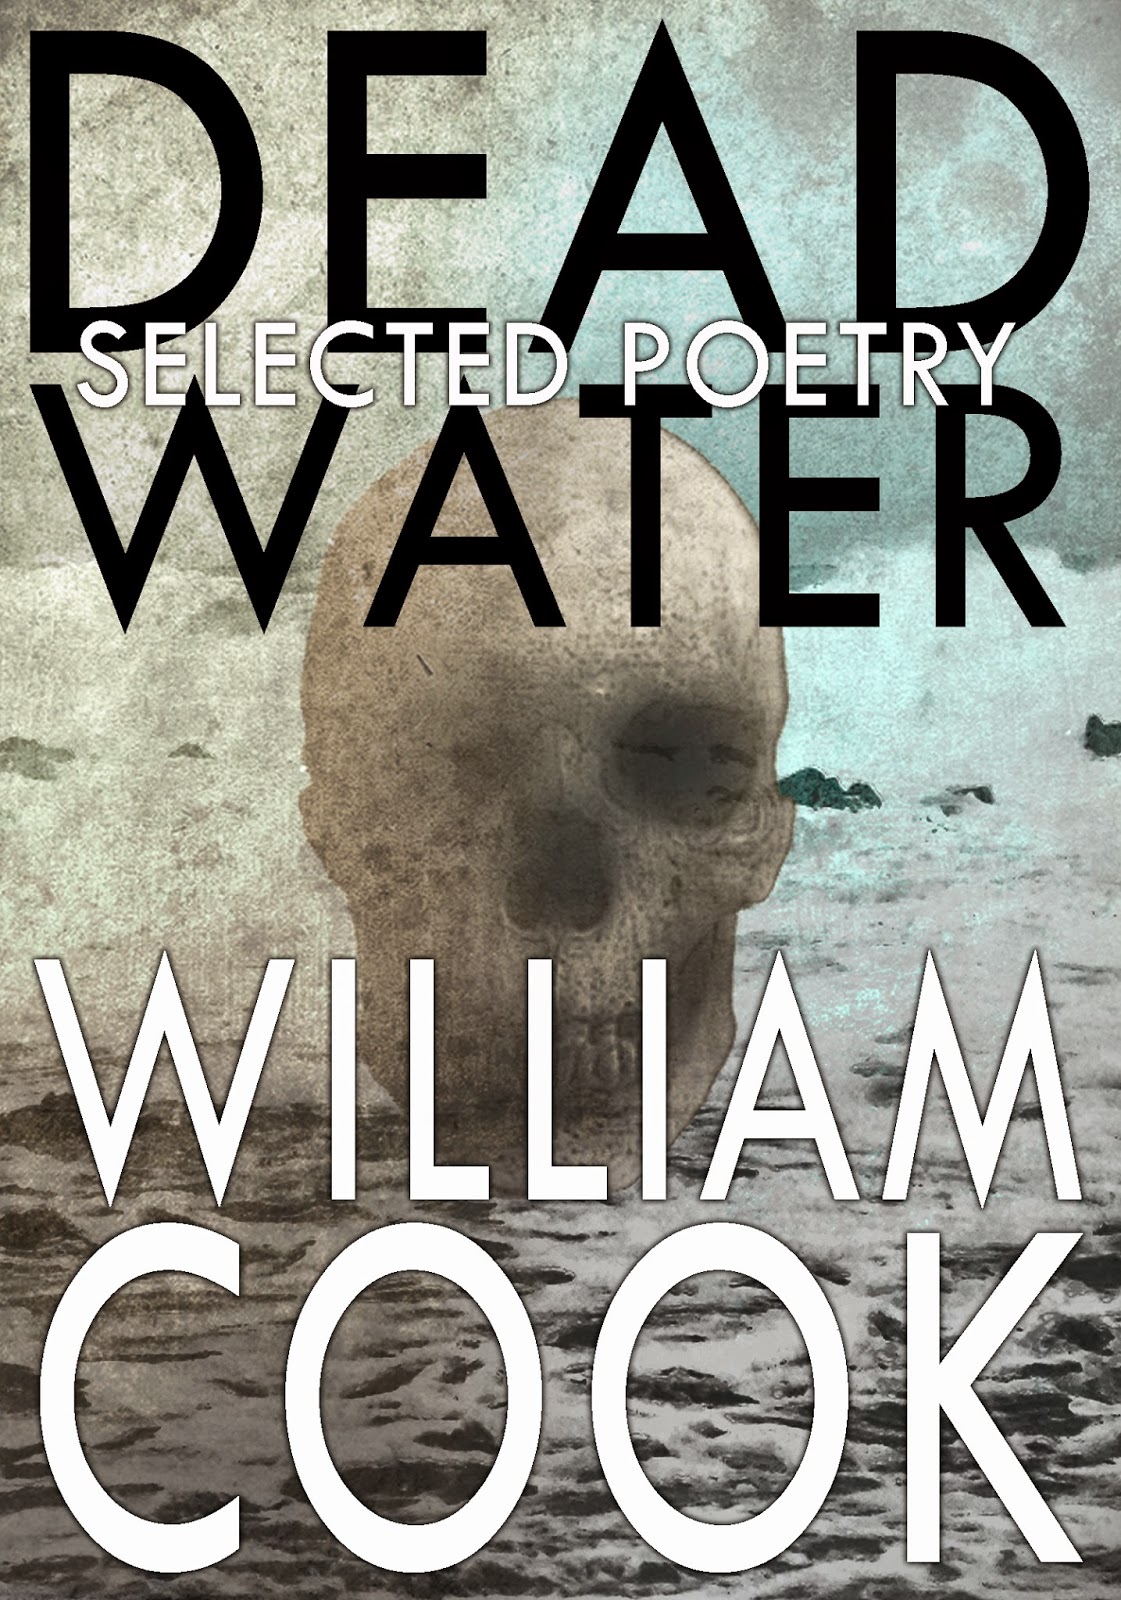 http://www.amazon.com/Dead-Water-Selected-Poetry-Horror-ebook/dp/B00AIEYP86/ref=asap_bc?ie=UTF8